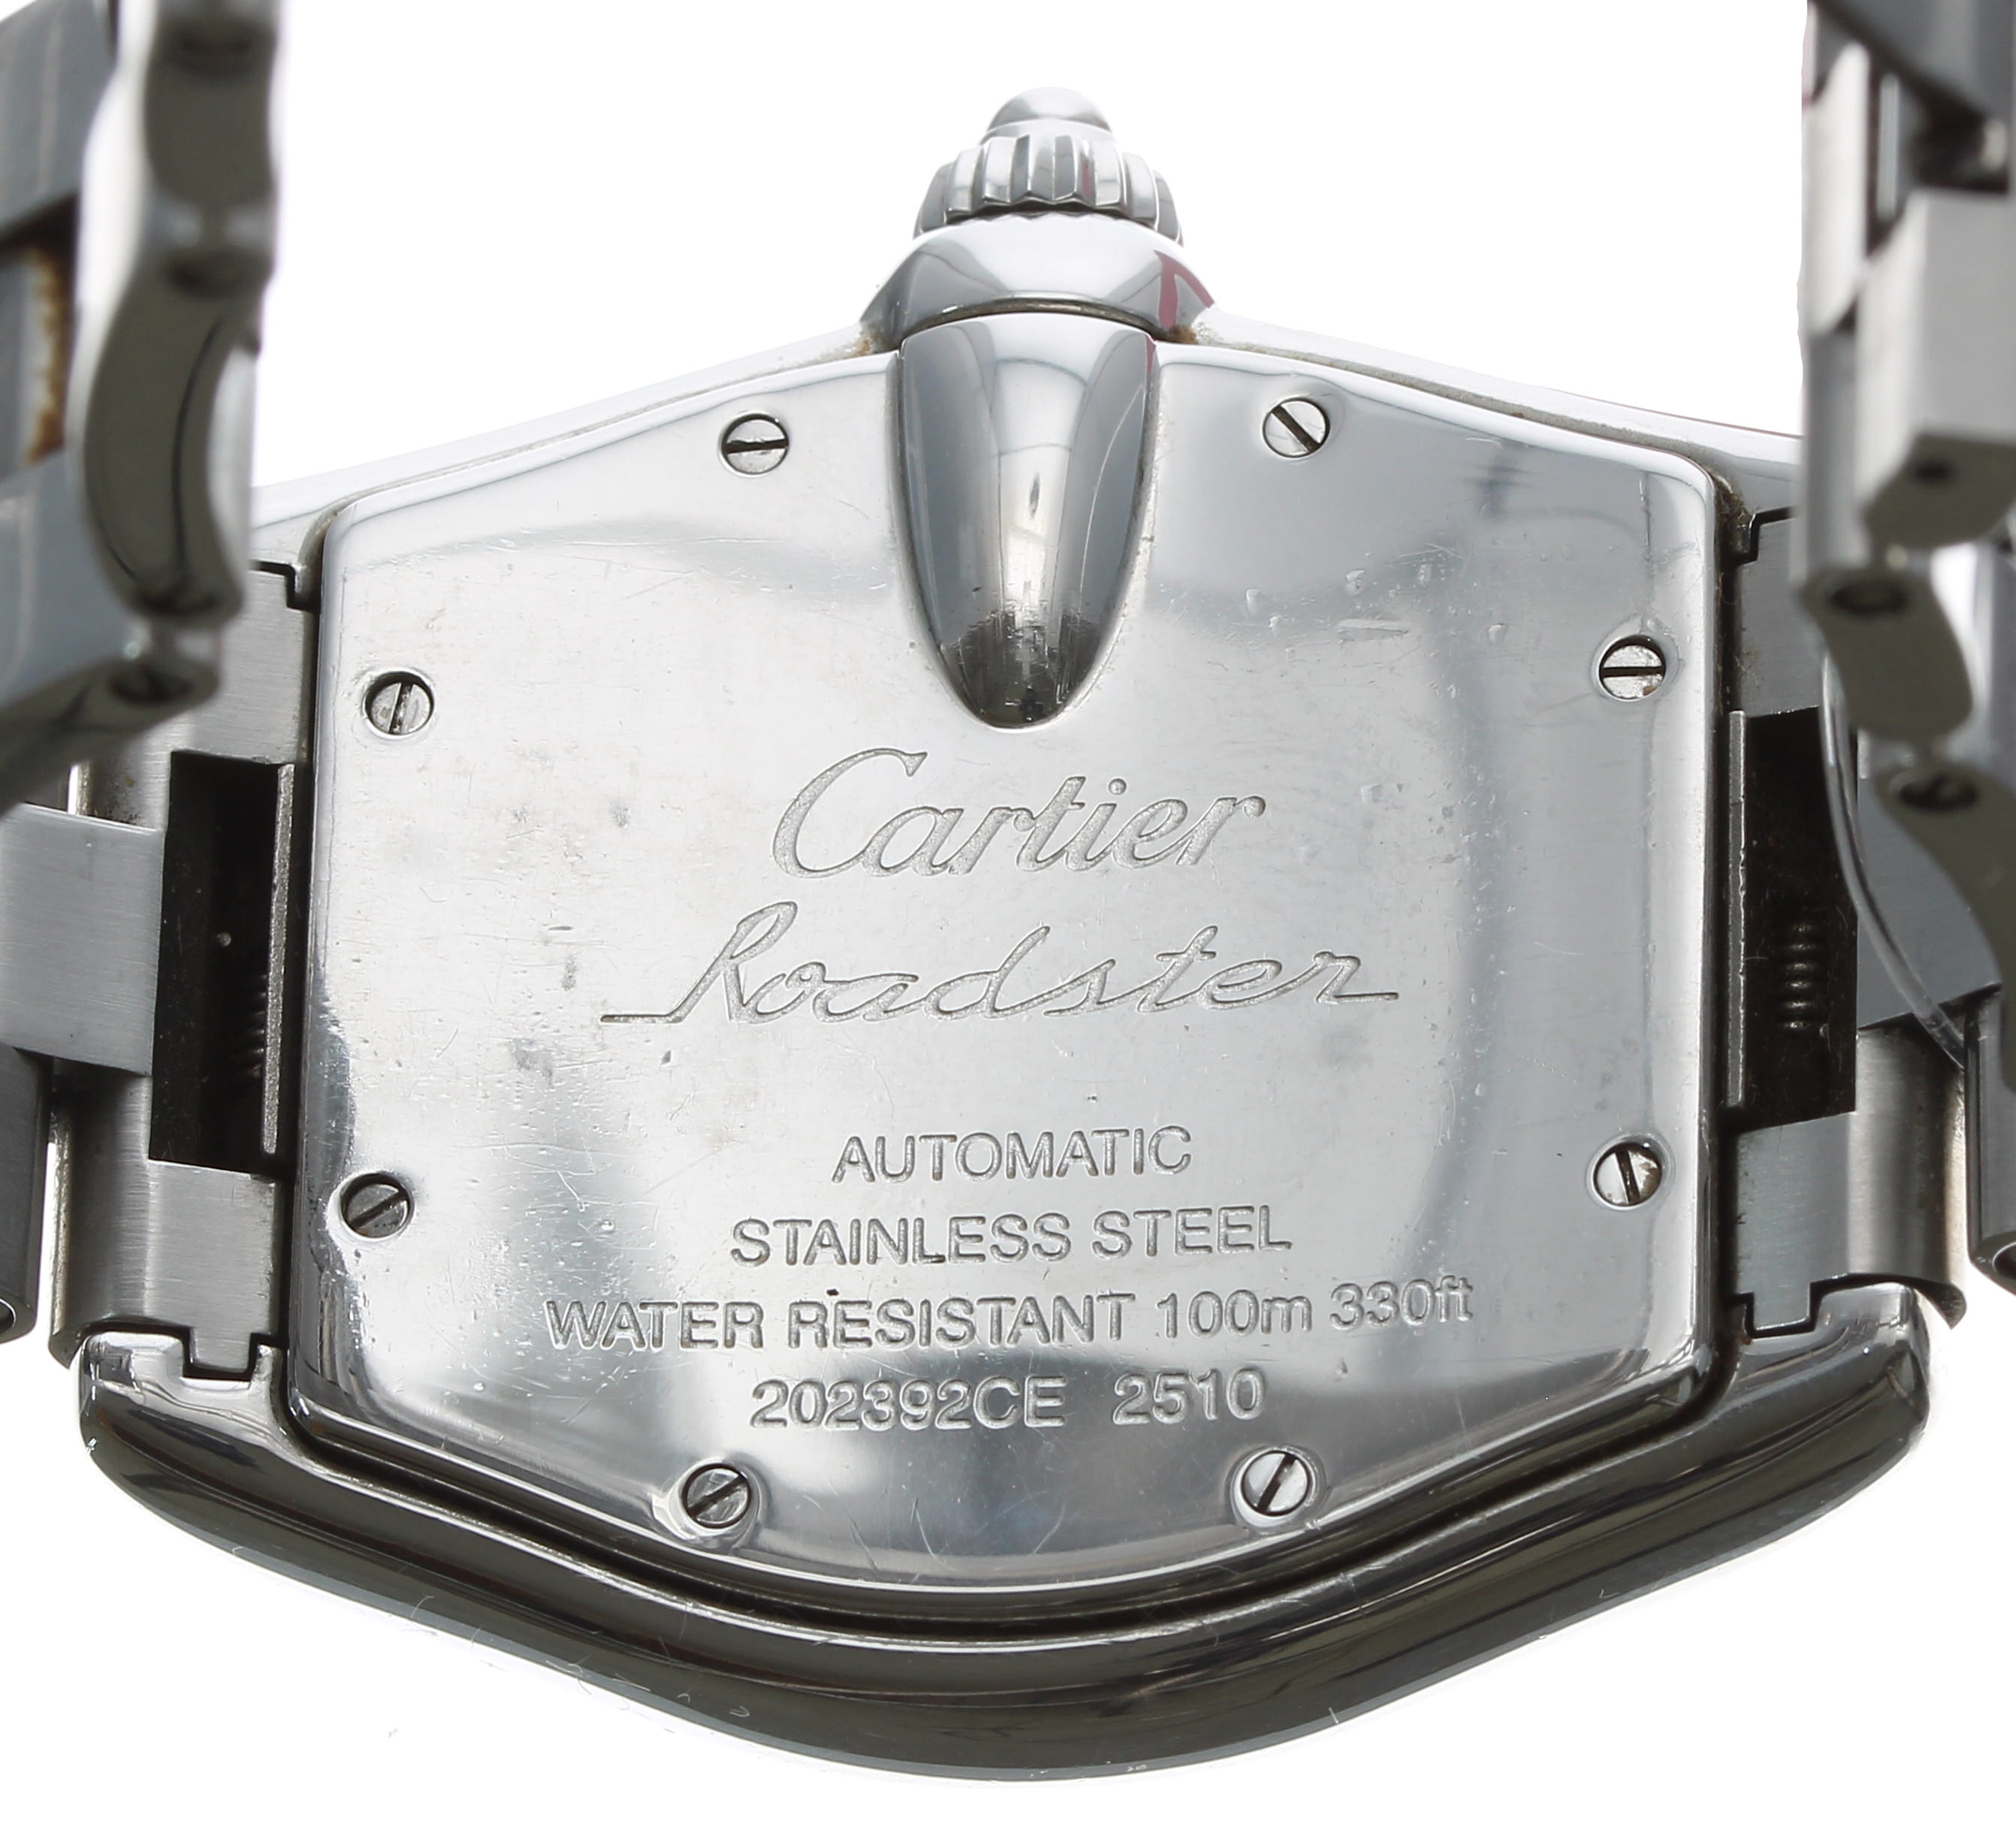 Cartier Roadster automatic gentleman's stainless steel wristwatch, reference no. 2510, serial number - Image 2 of 2